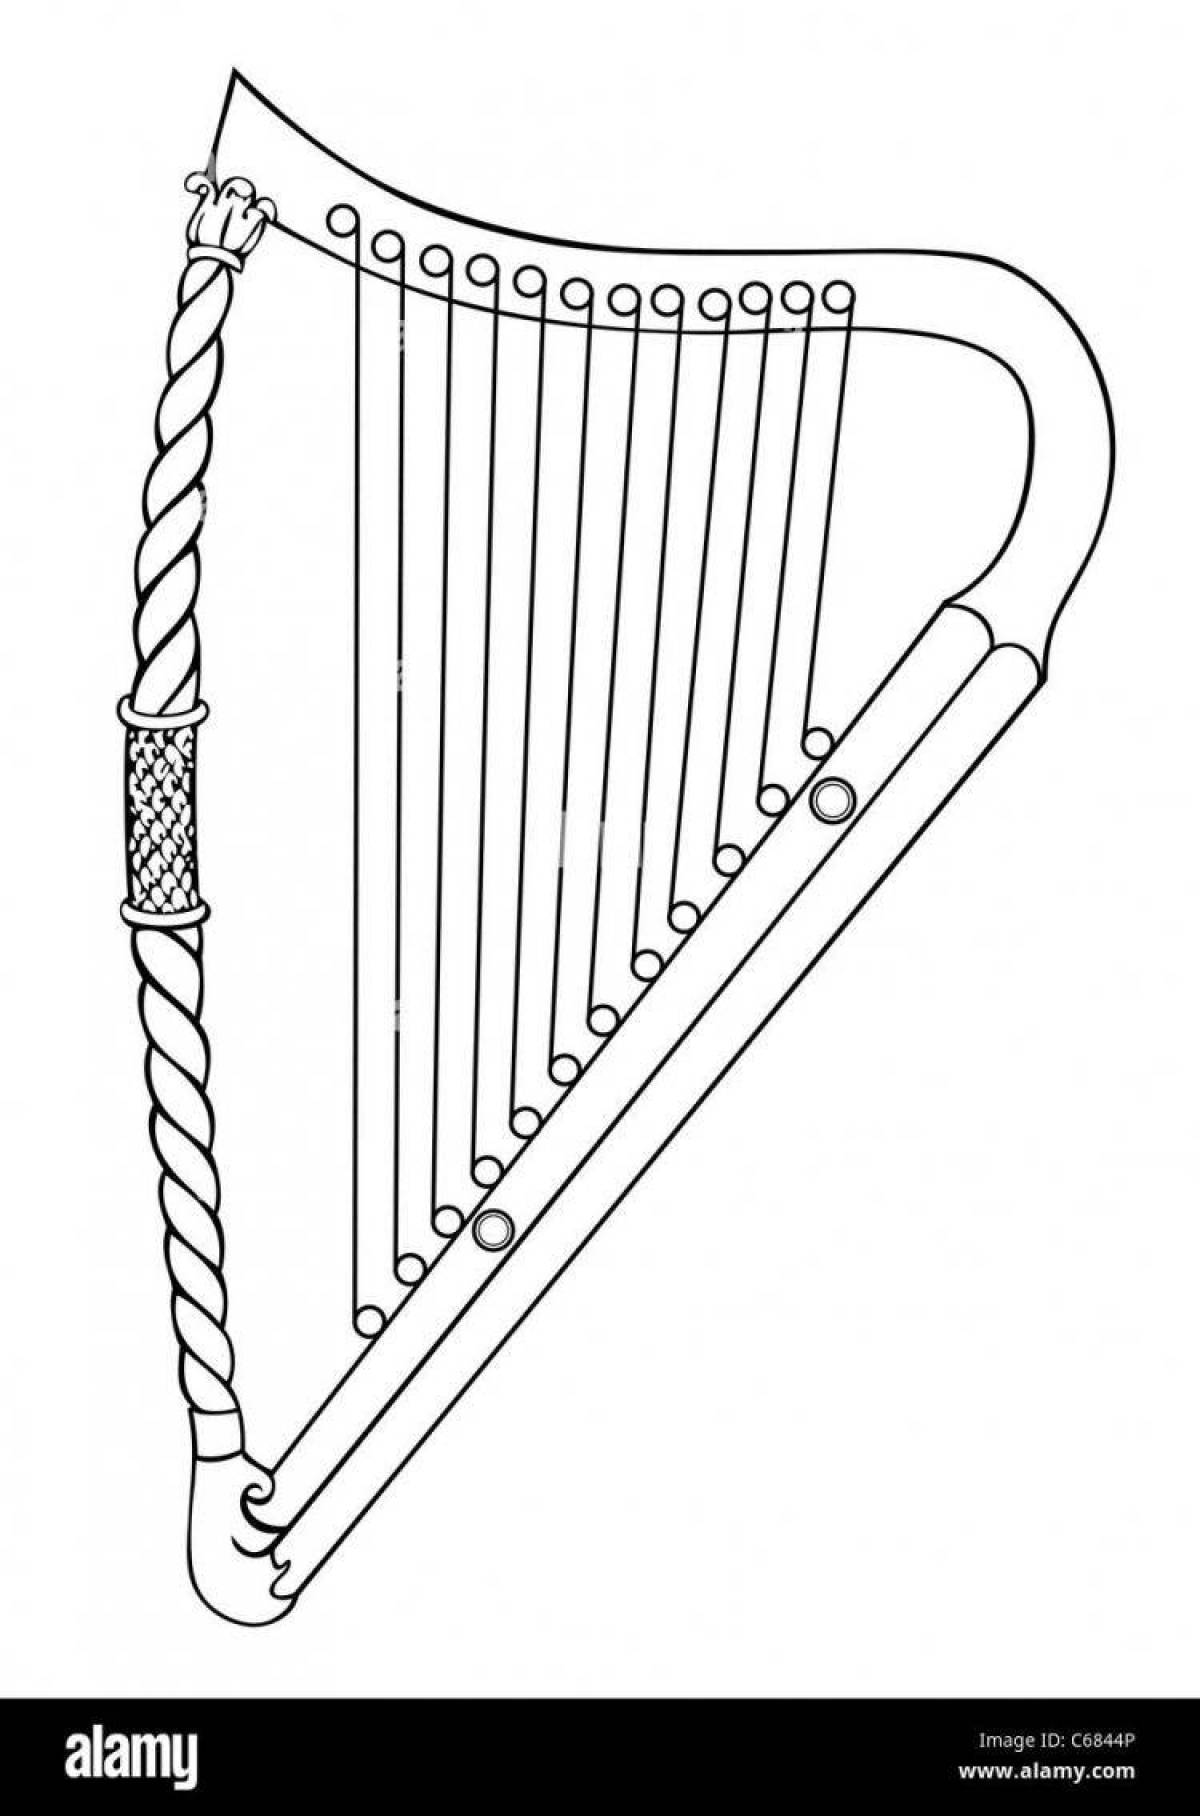 Colorful drawing of a harp